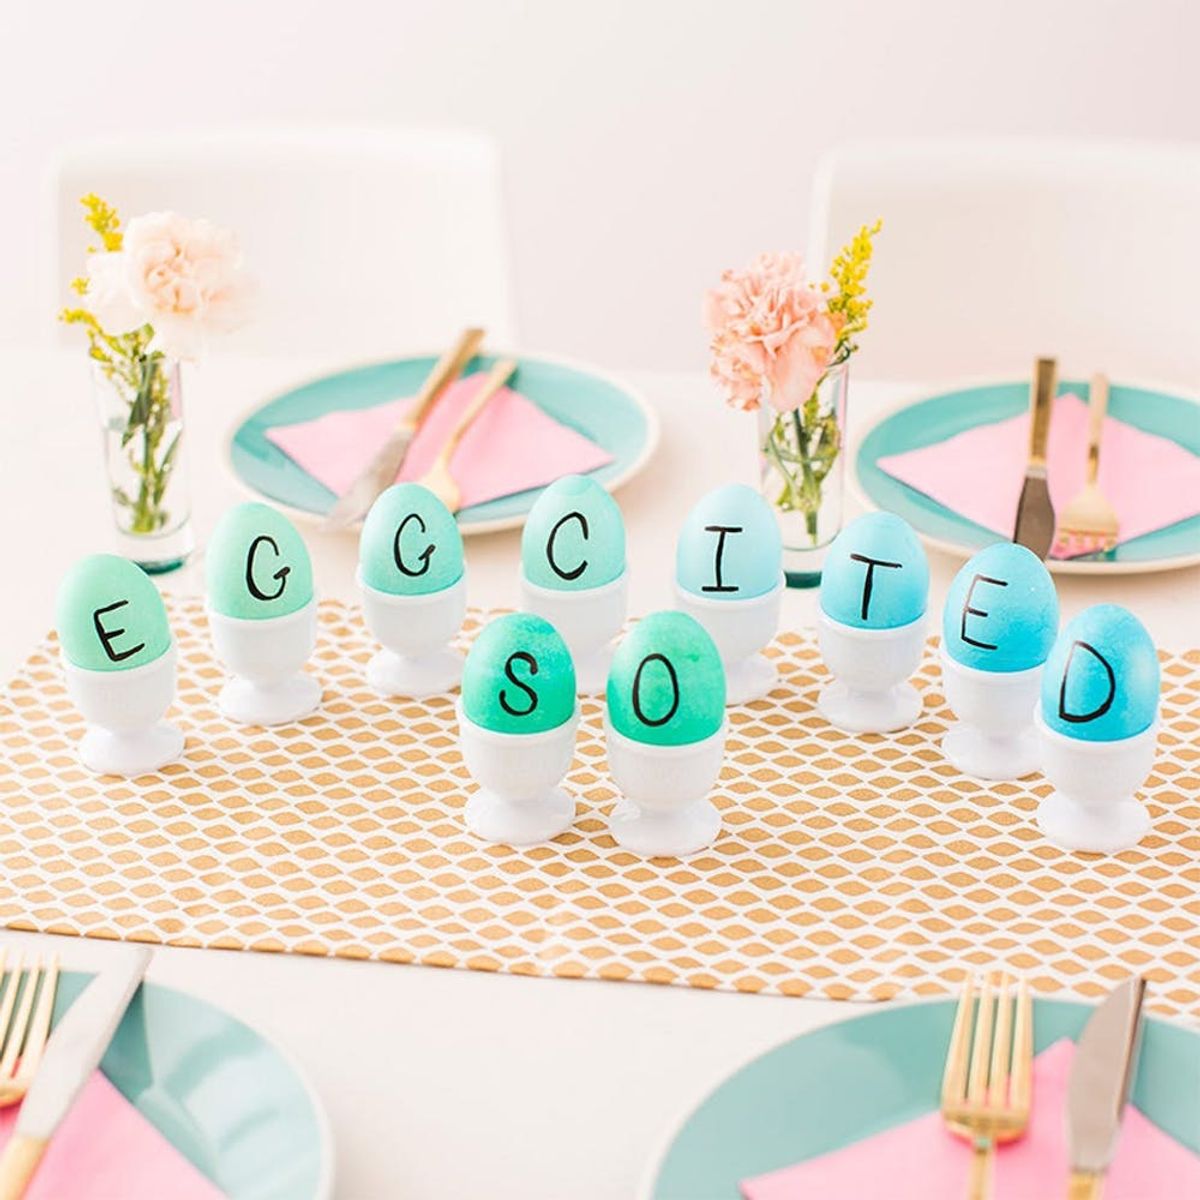 10 DIY Centerpieces For the Most Colorful Easter Ever